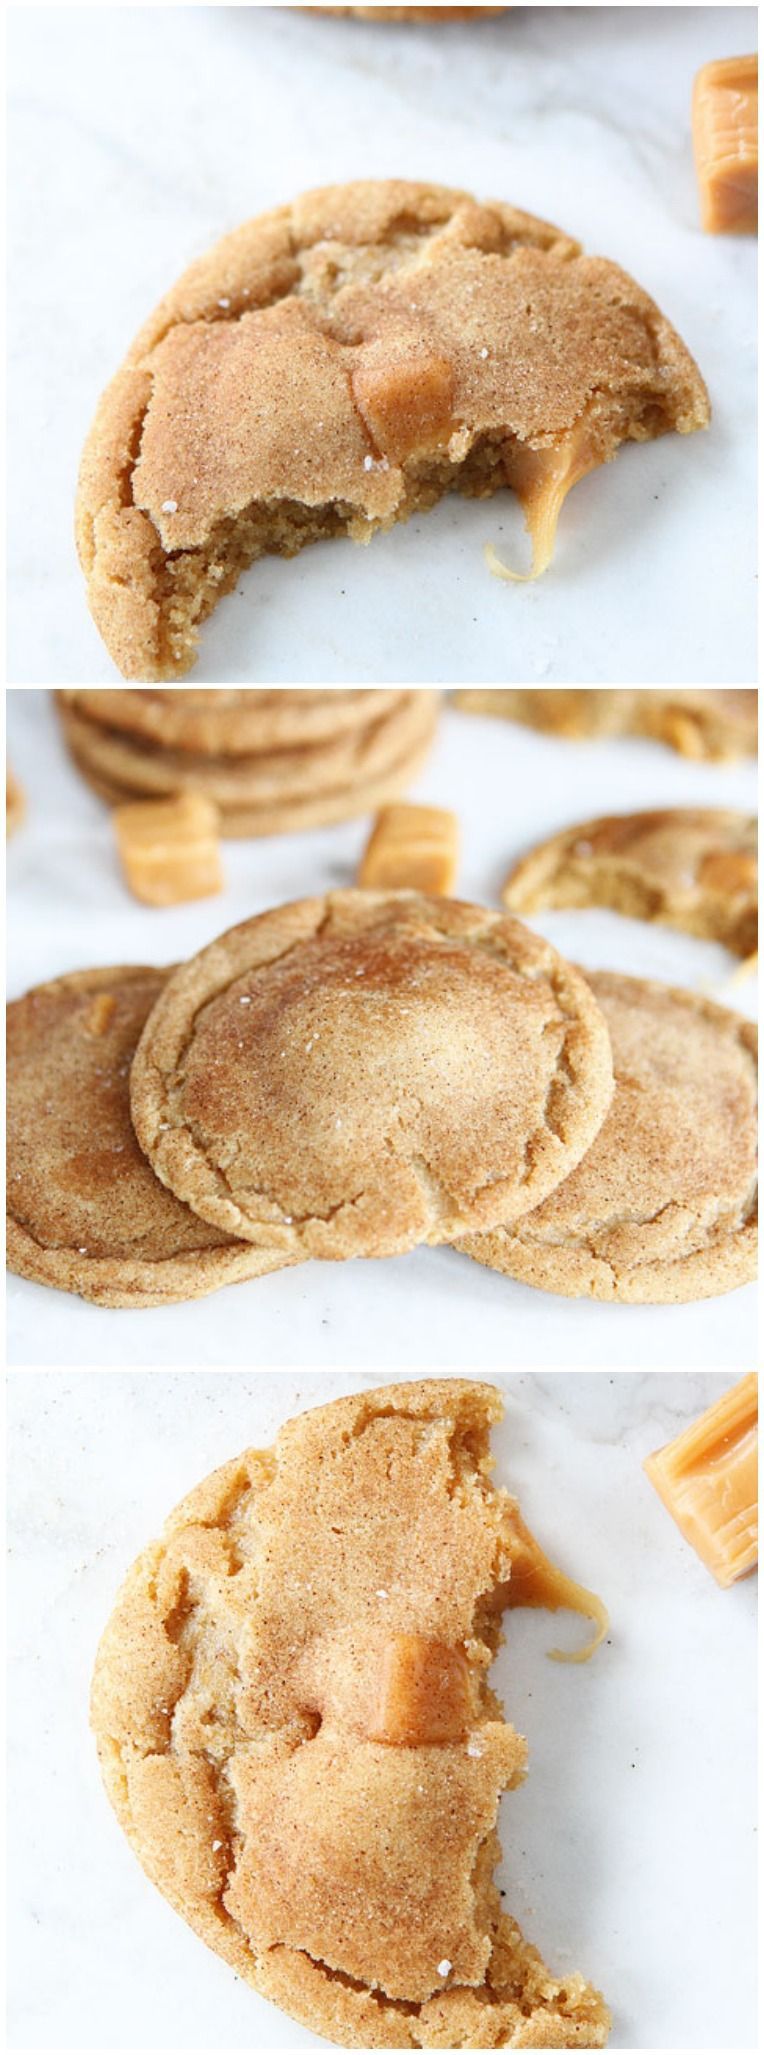 Brown Butter Salted Caramel Cookie Recipe from @Maria (Two Peas and Their Pod)